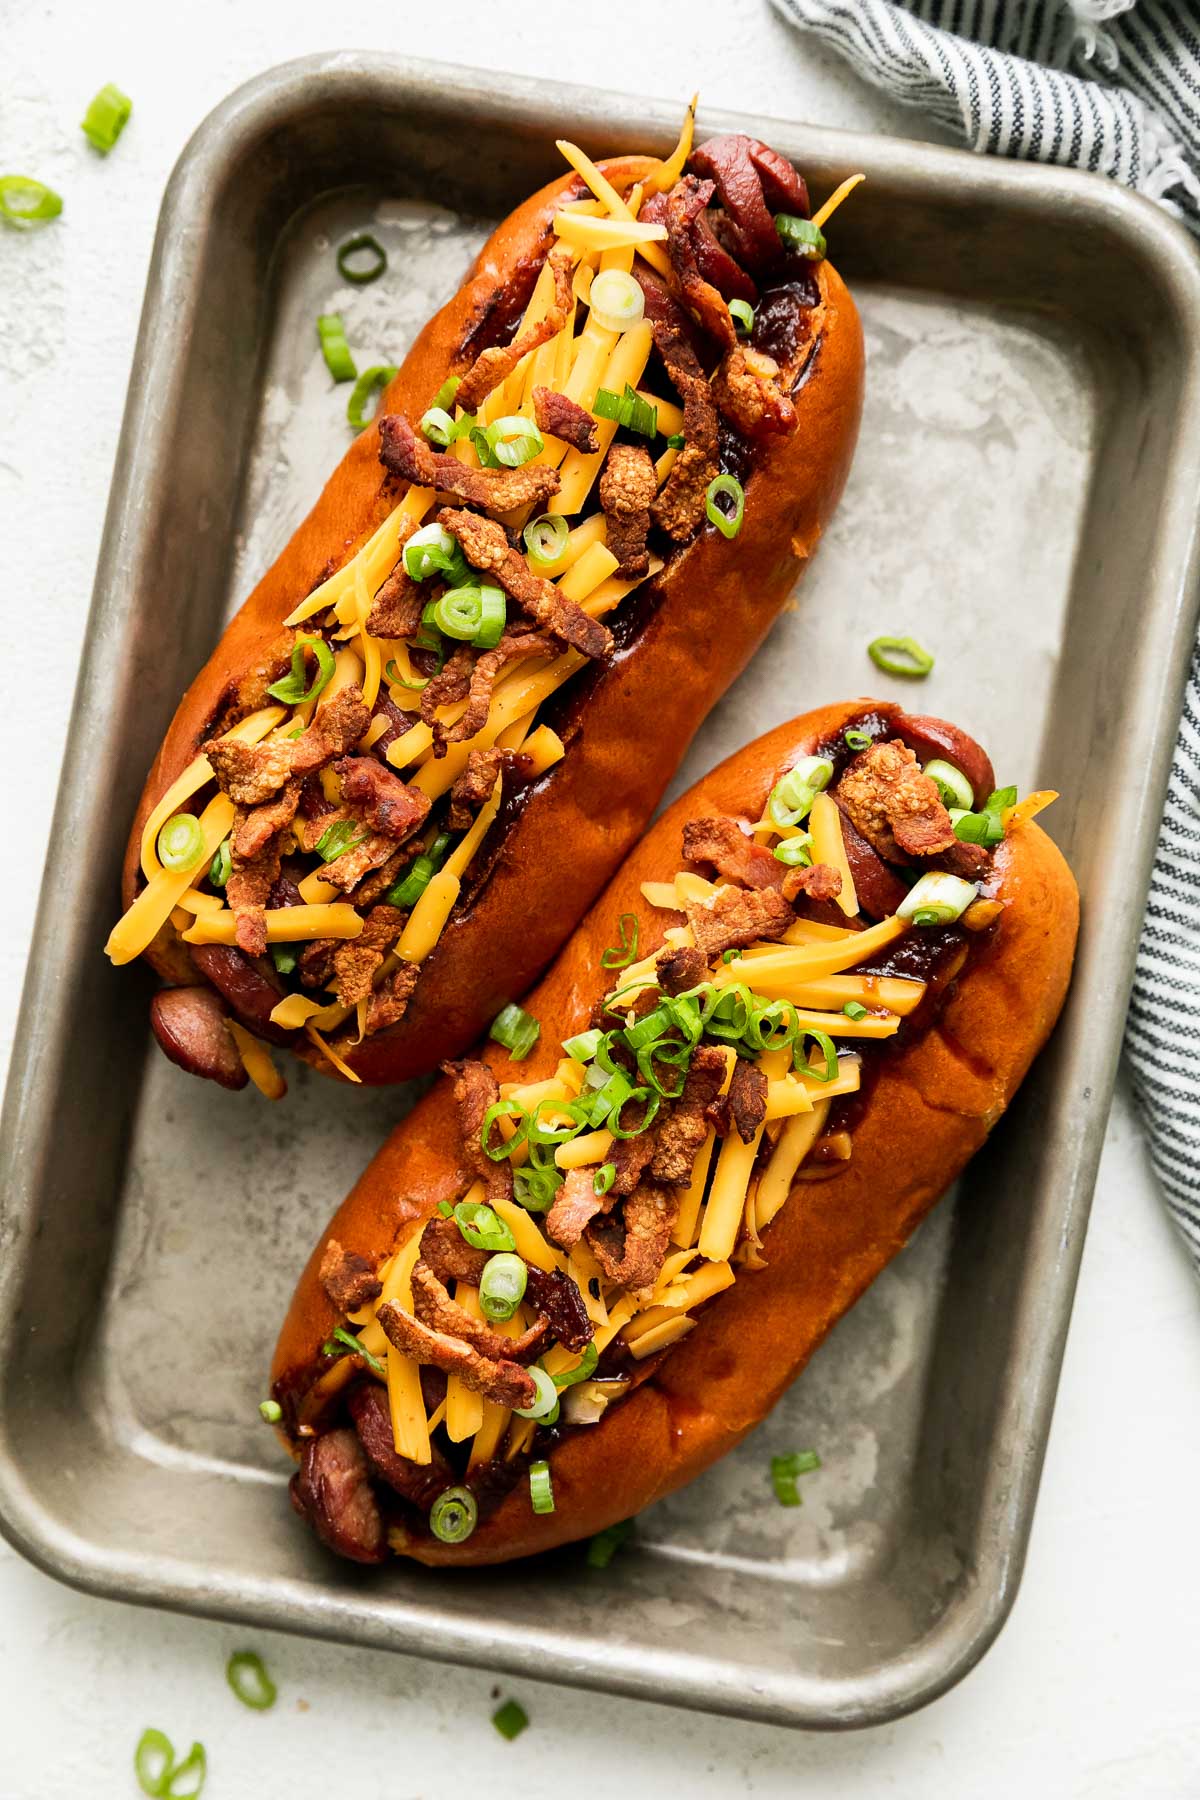 https://playswellwithbutter.com/wp-content/uploads/2022/05/Grilled-Hot-Dogs-How-to-Grill-Hot-Dogs-28.jpg